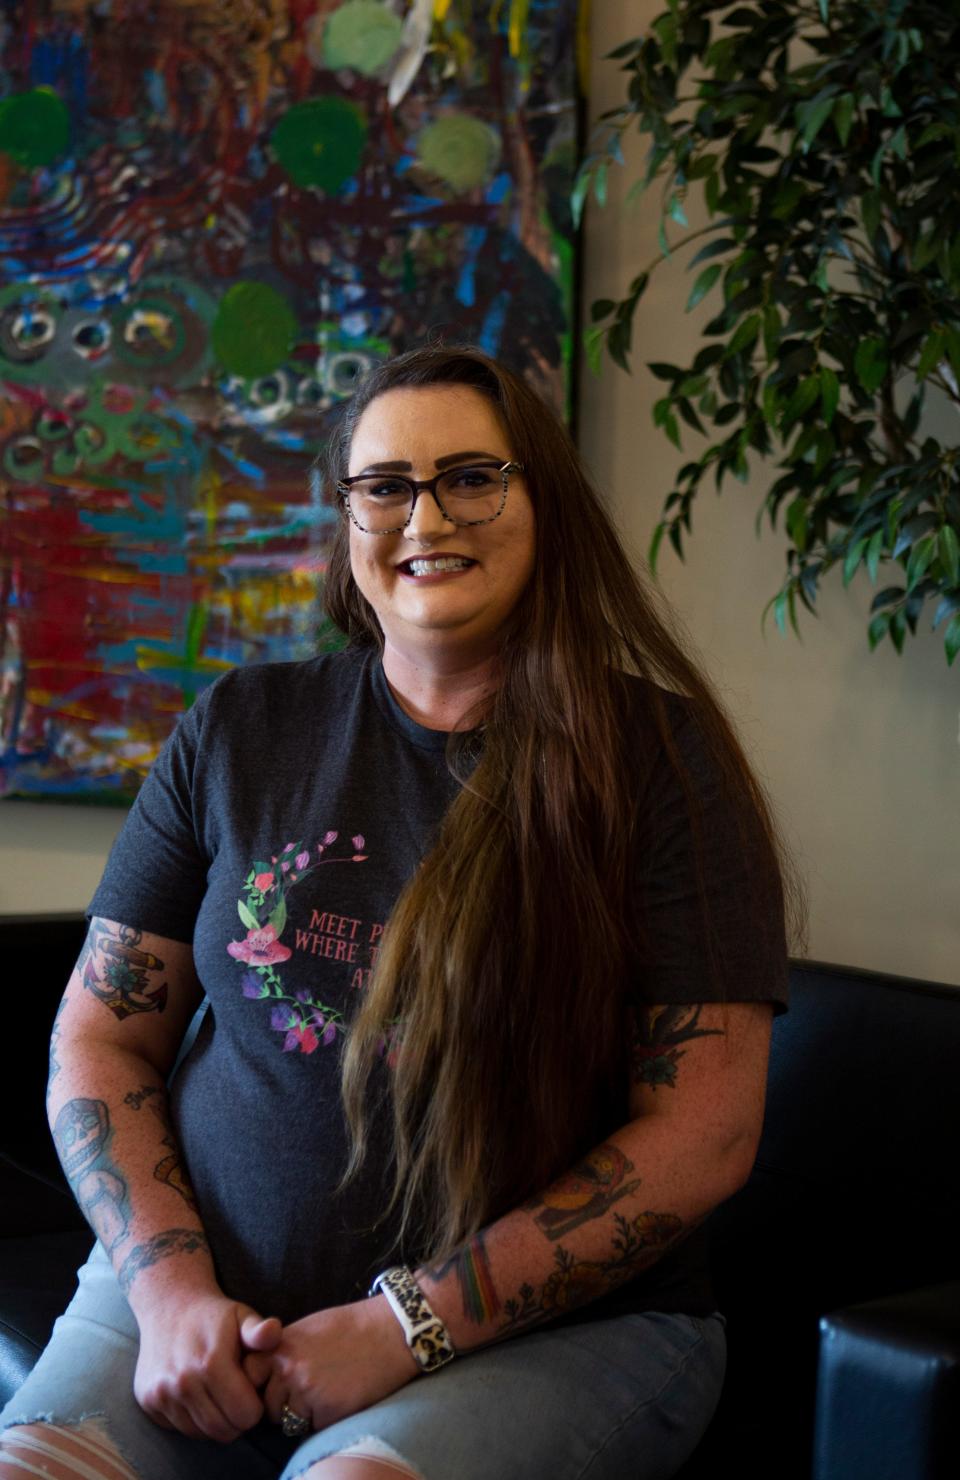 Licensed chemical dependency counselor Heather Lamkins of Integrated Services for Behavioral Health is the organizer for Sober Fest. The event will be downtown from 3 to 8 p.m. Wednesday and celebrate substance abuse recovery and those in recovery.